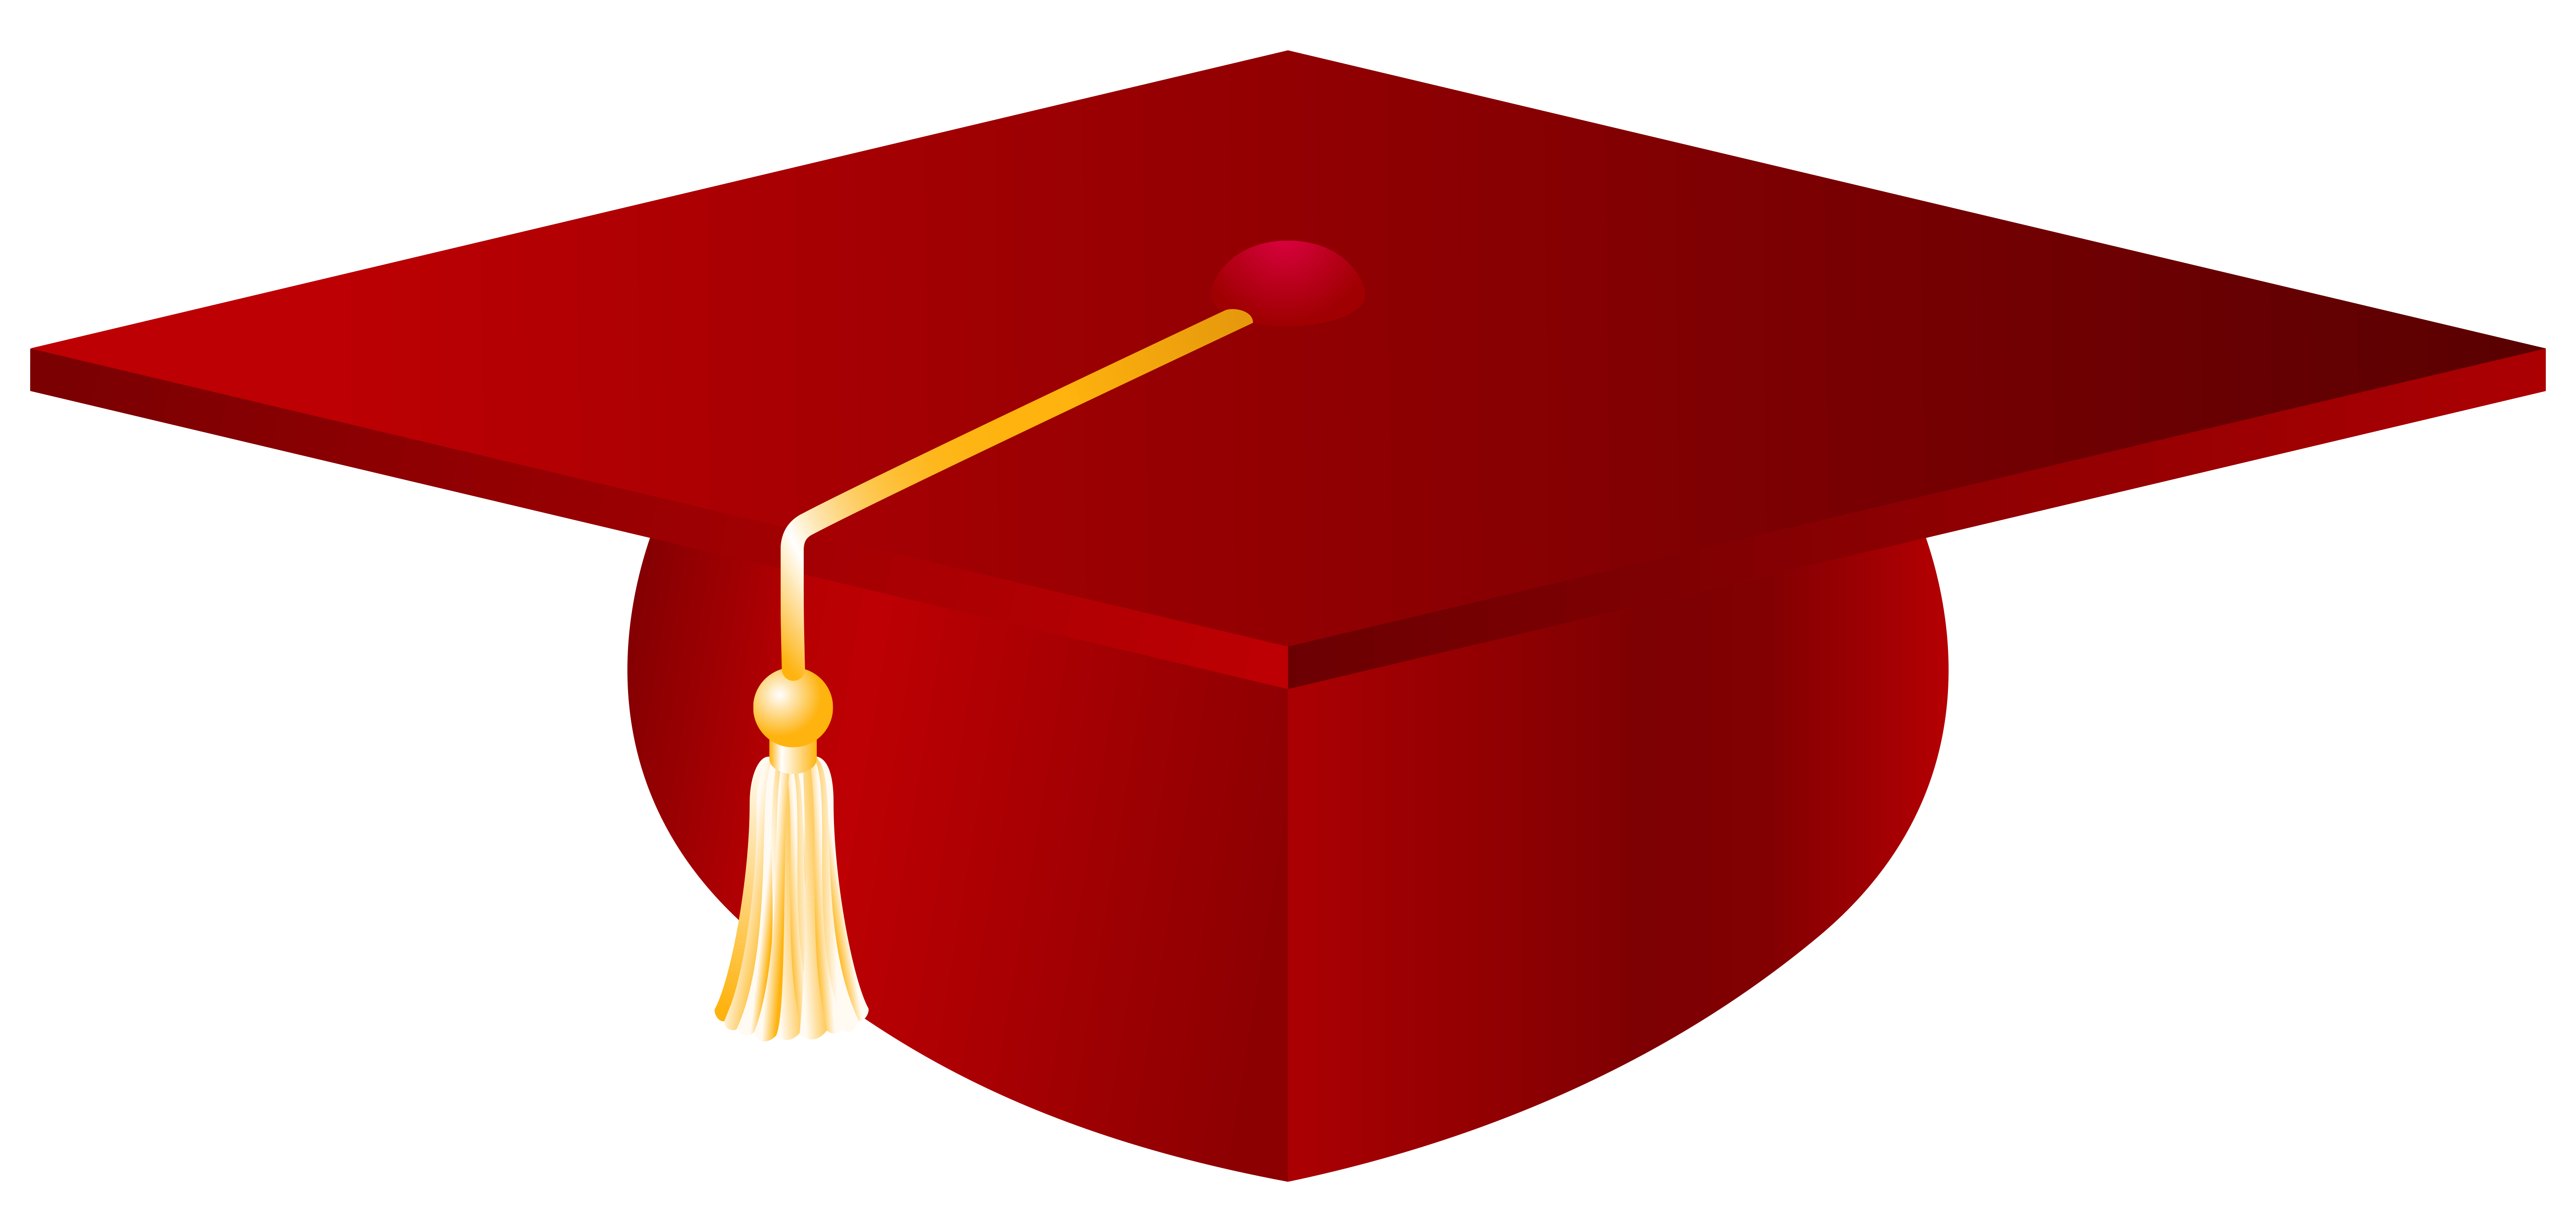 Red Graduation Cap Png Vector Clipart Image Gallery Yopriceville High Quality Images And Transparent Png Free Clipart